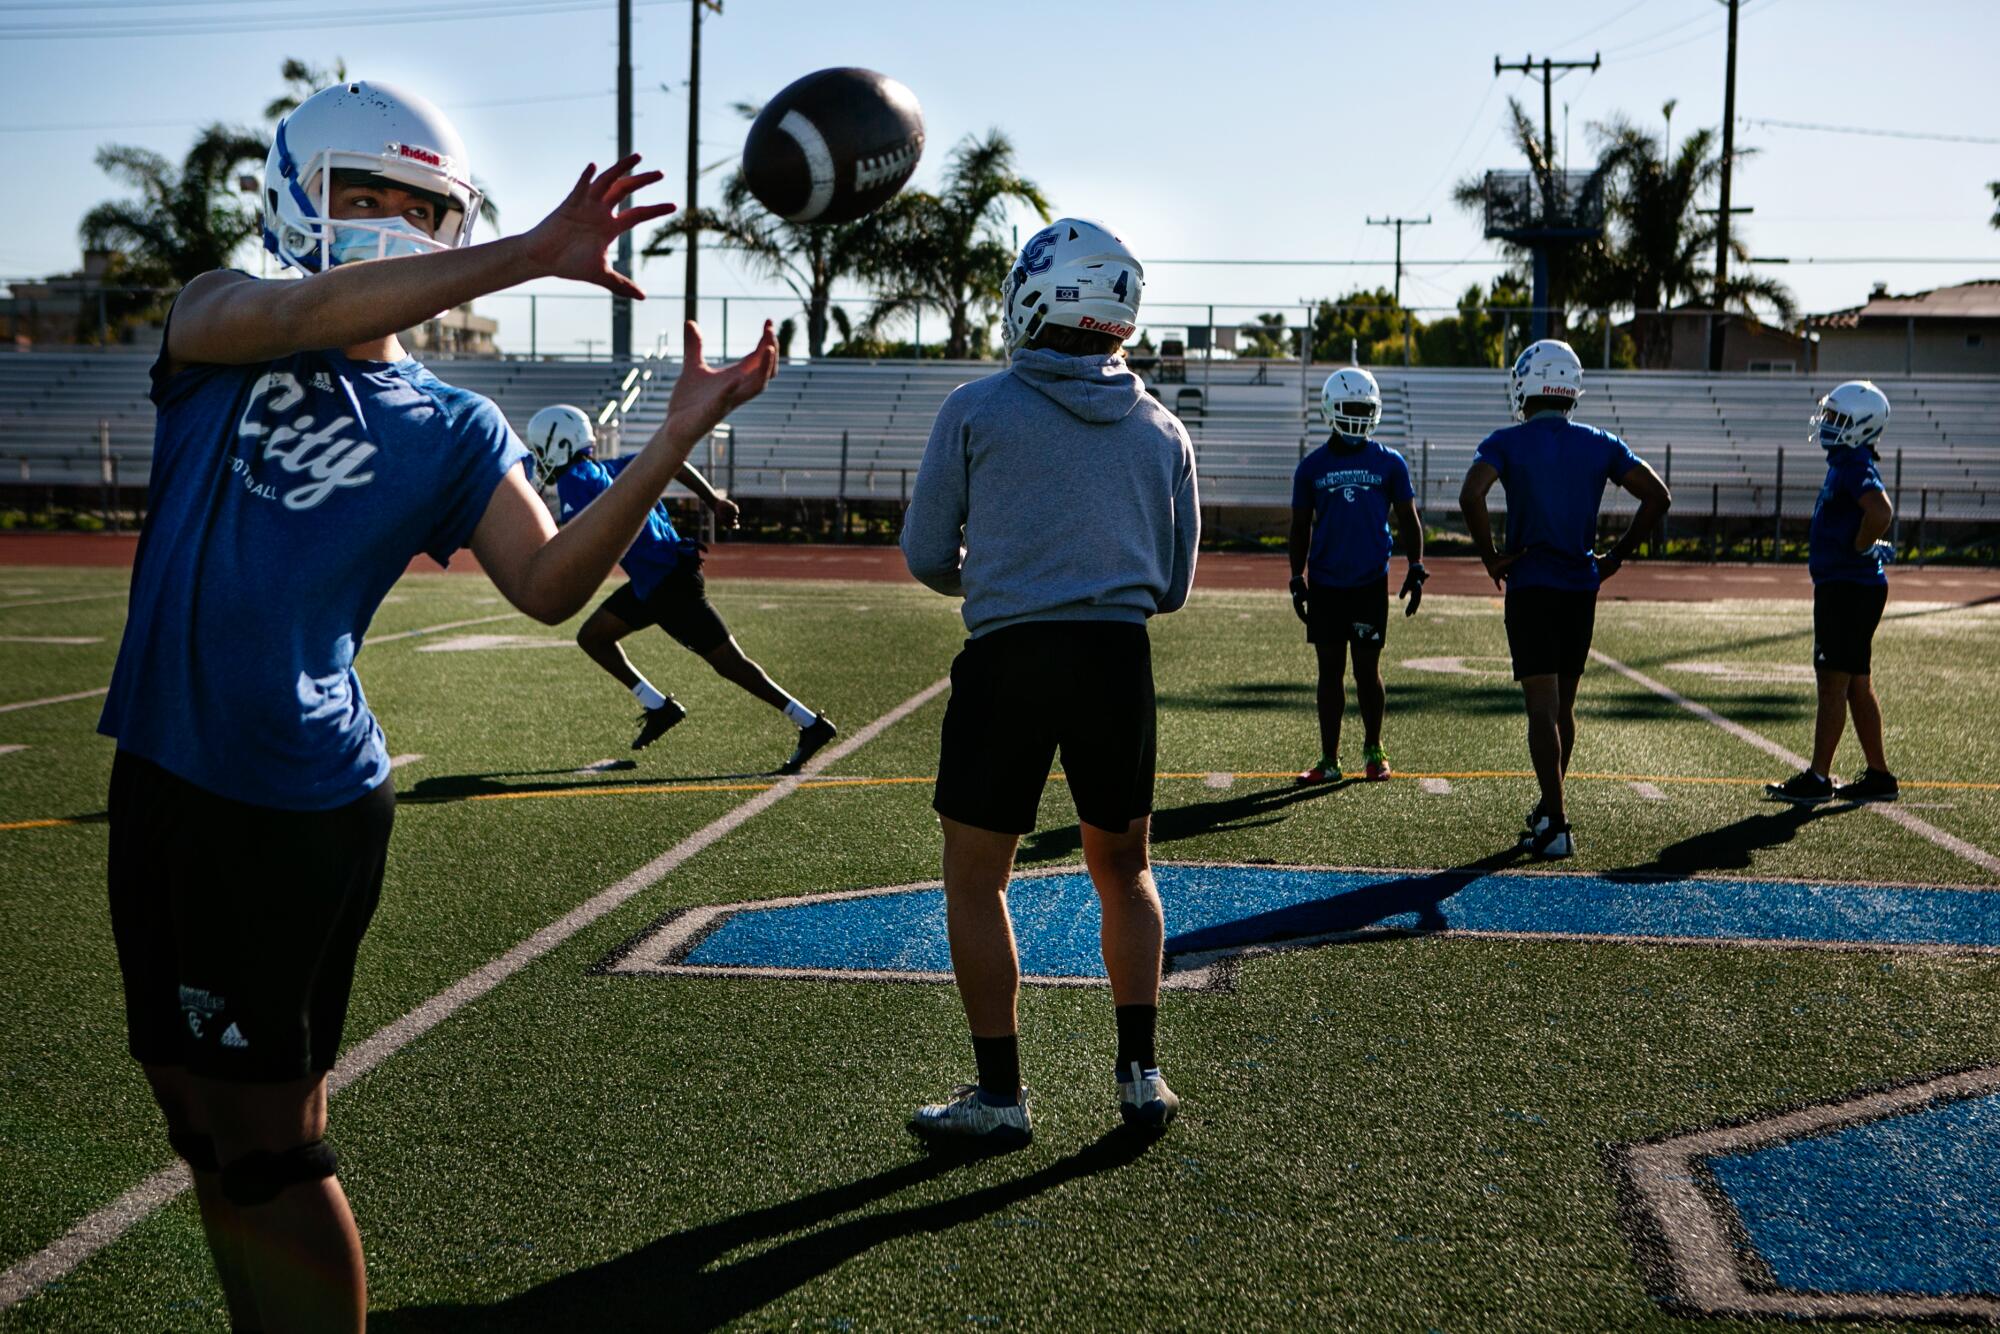 Quarterbacks and receivers at Culver City High School work on drills its first official football practice.